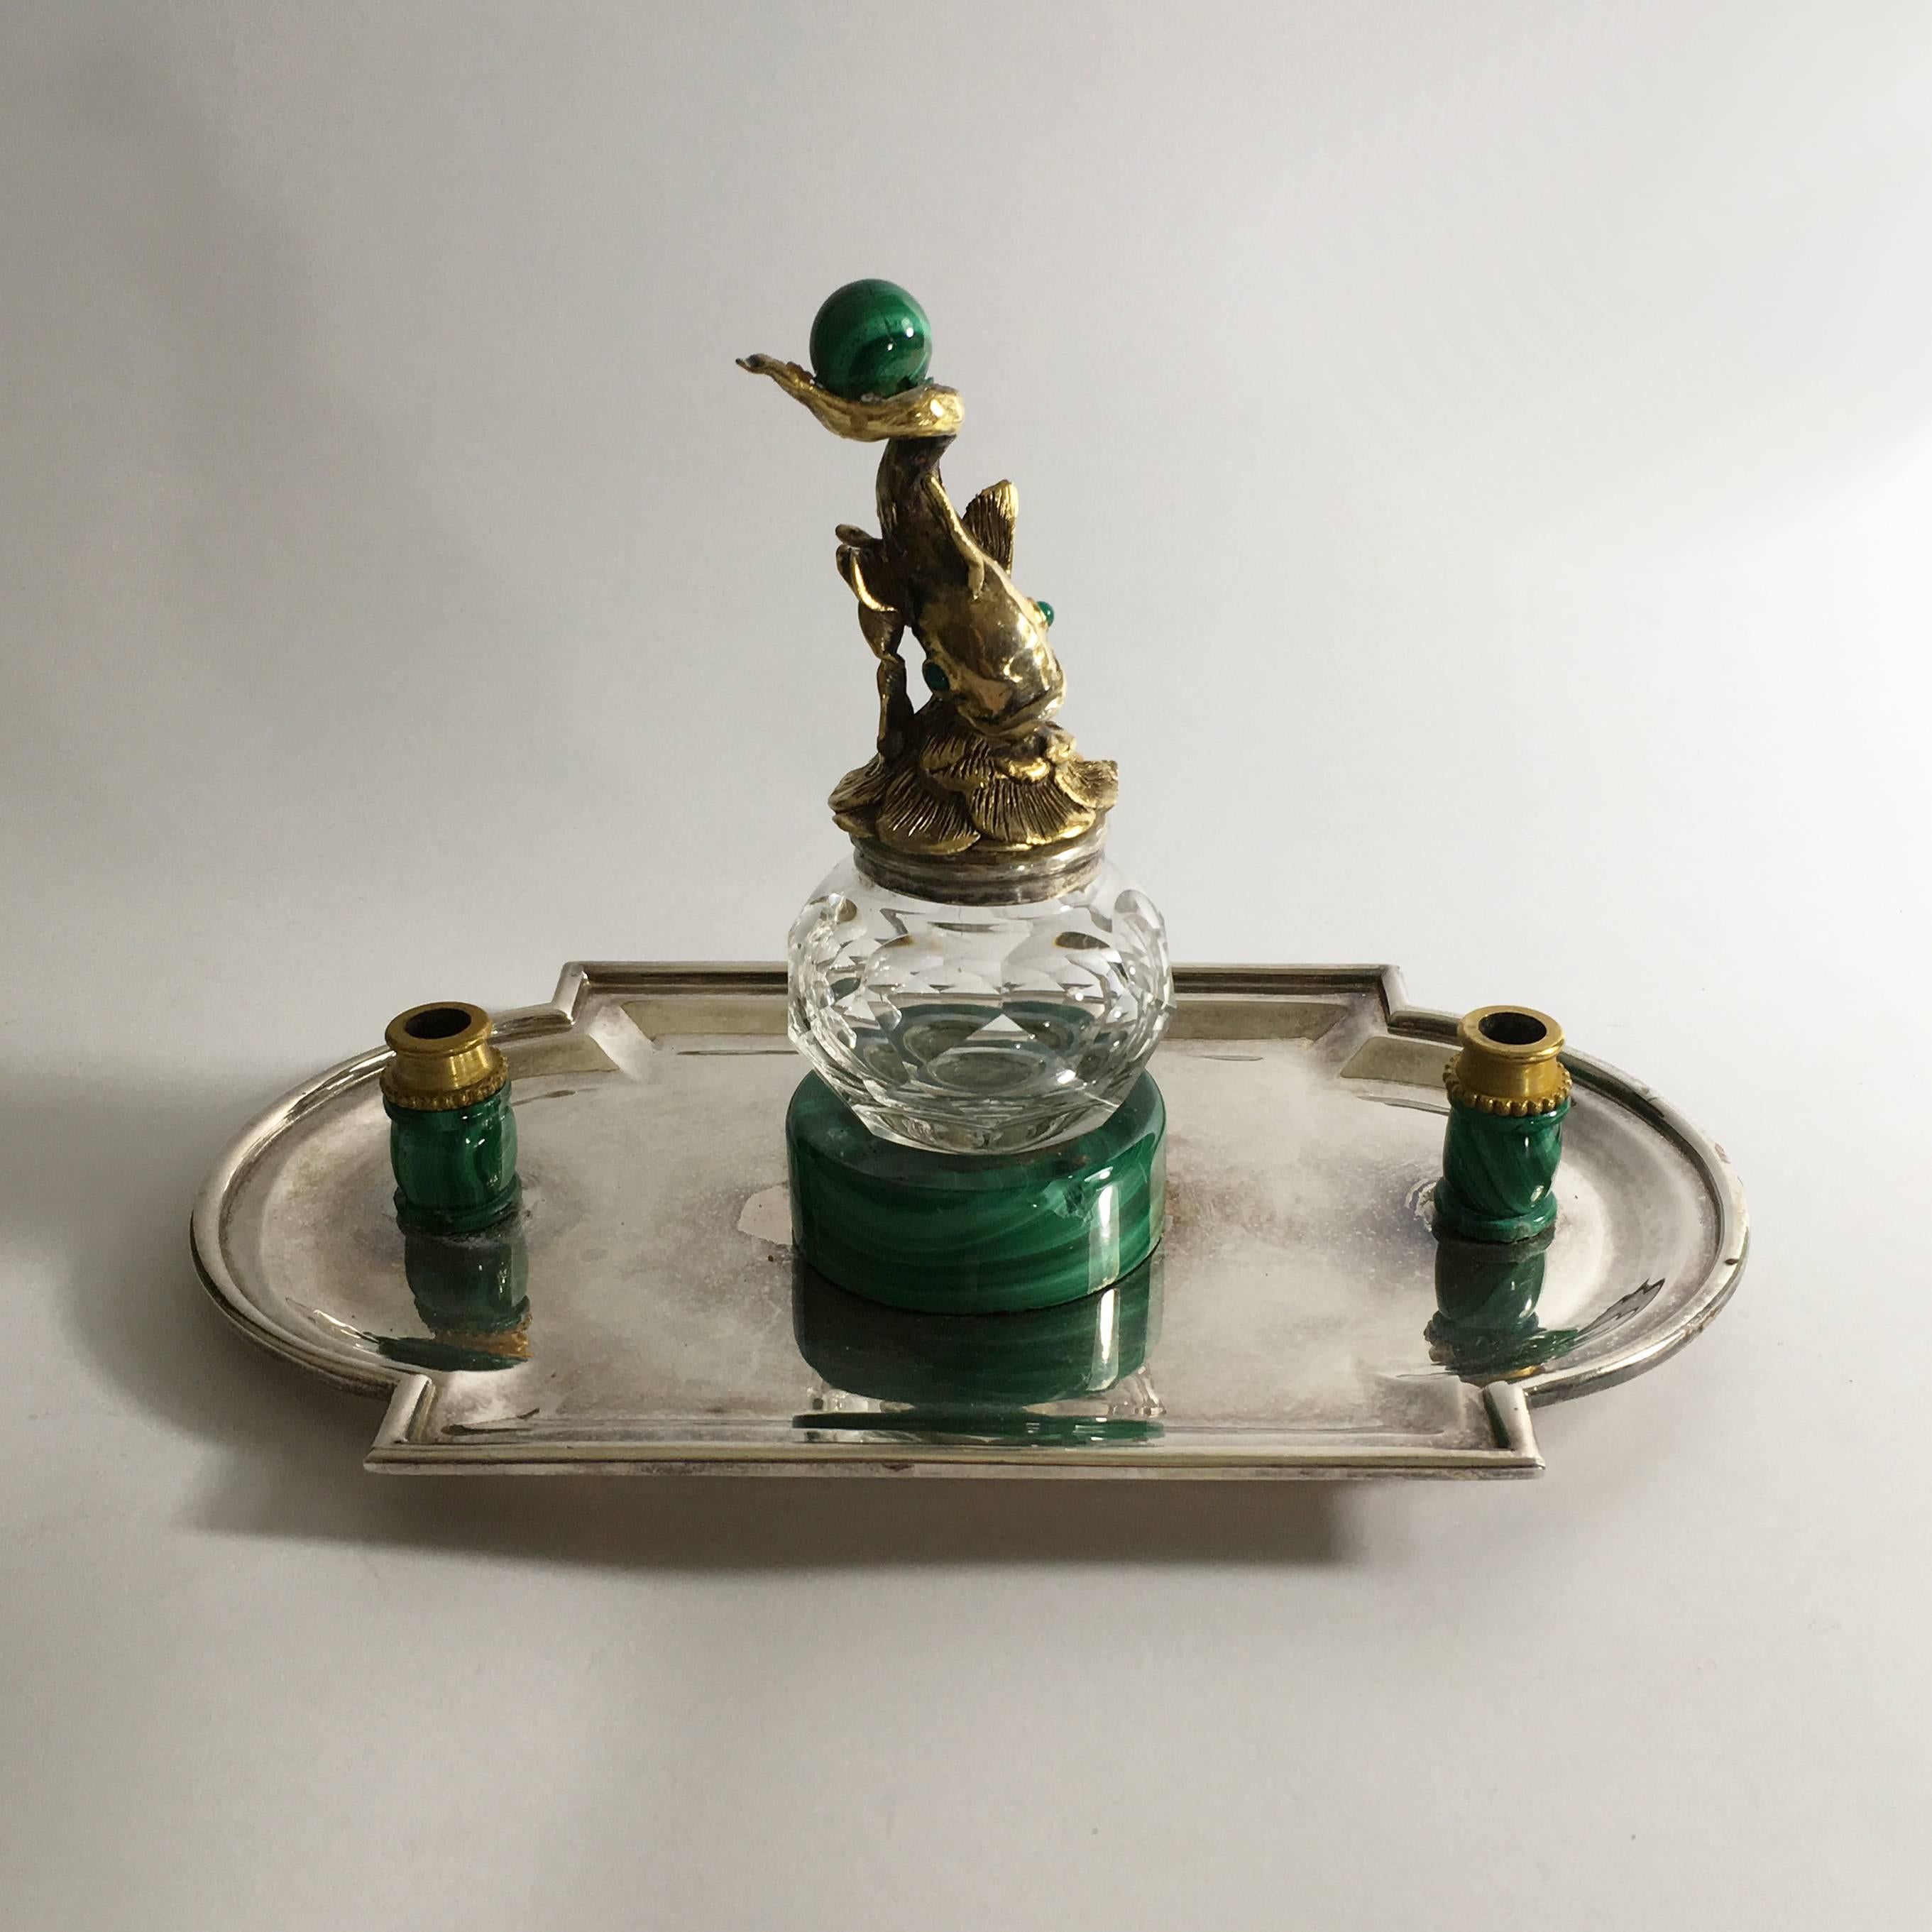 A very fine Italian 19th century silver, gilt bronze, malachite and crystal inkwell.
The silver base is surmounted by two pen holders in bronze mounted malachite and at the centre a crystal ink-reservoir raised on a malachite base.
The ink